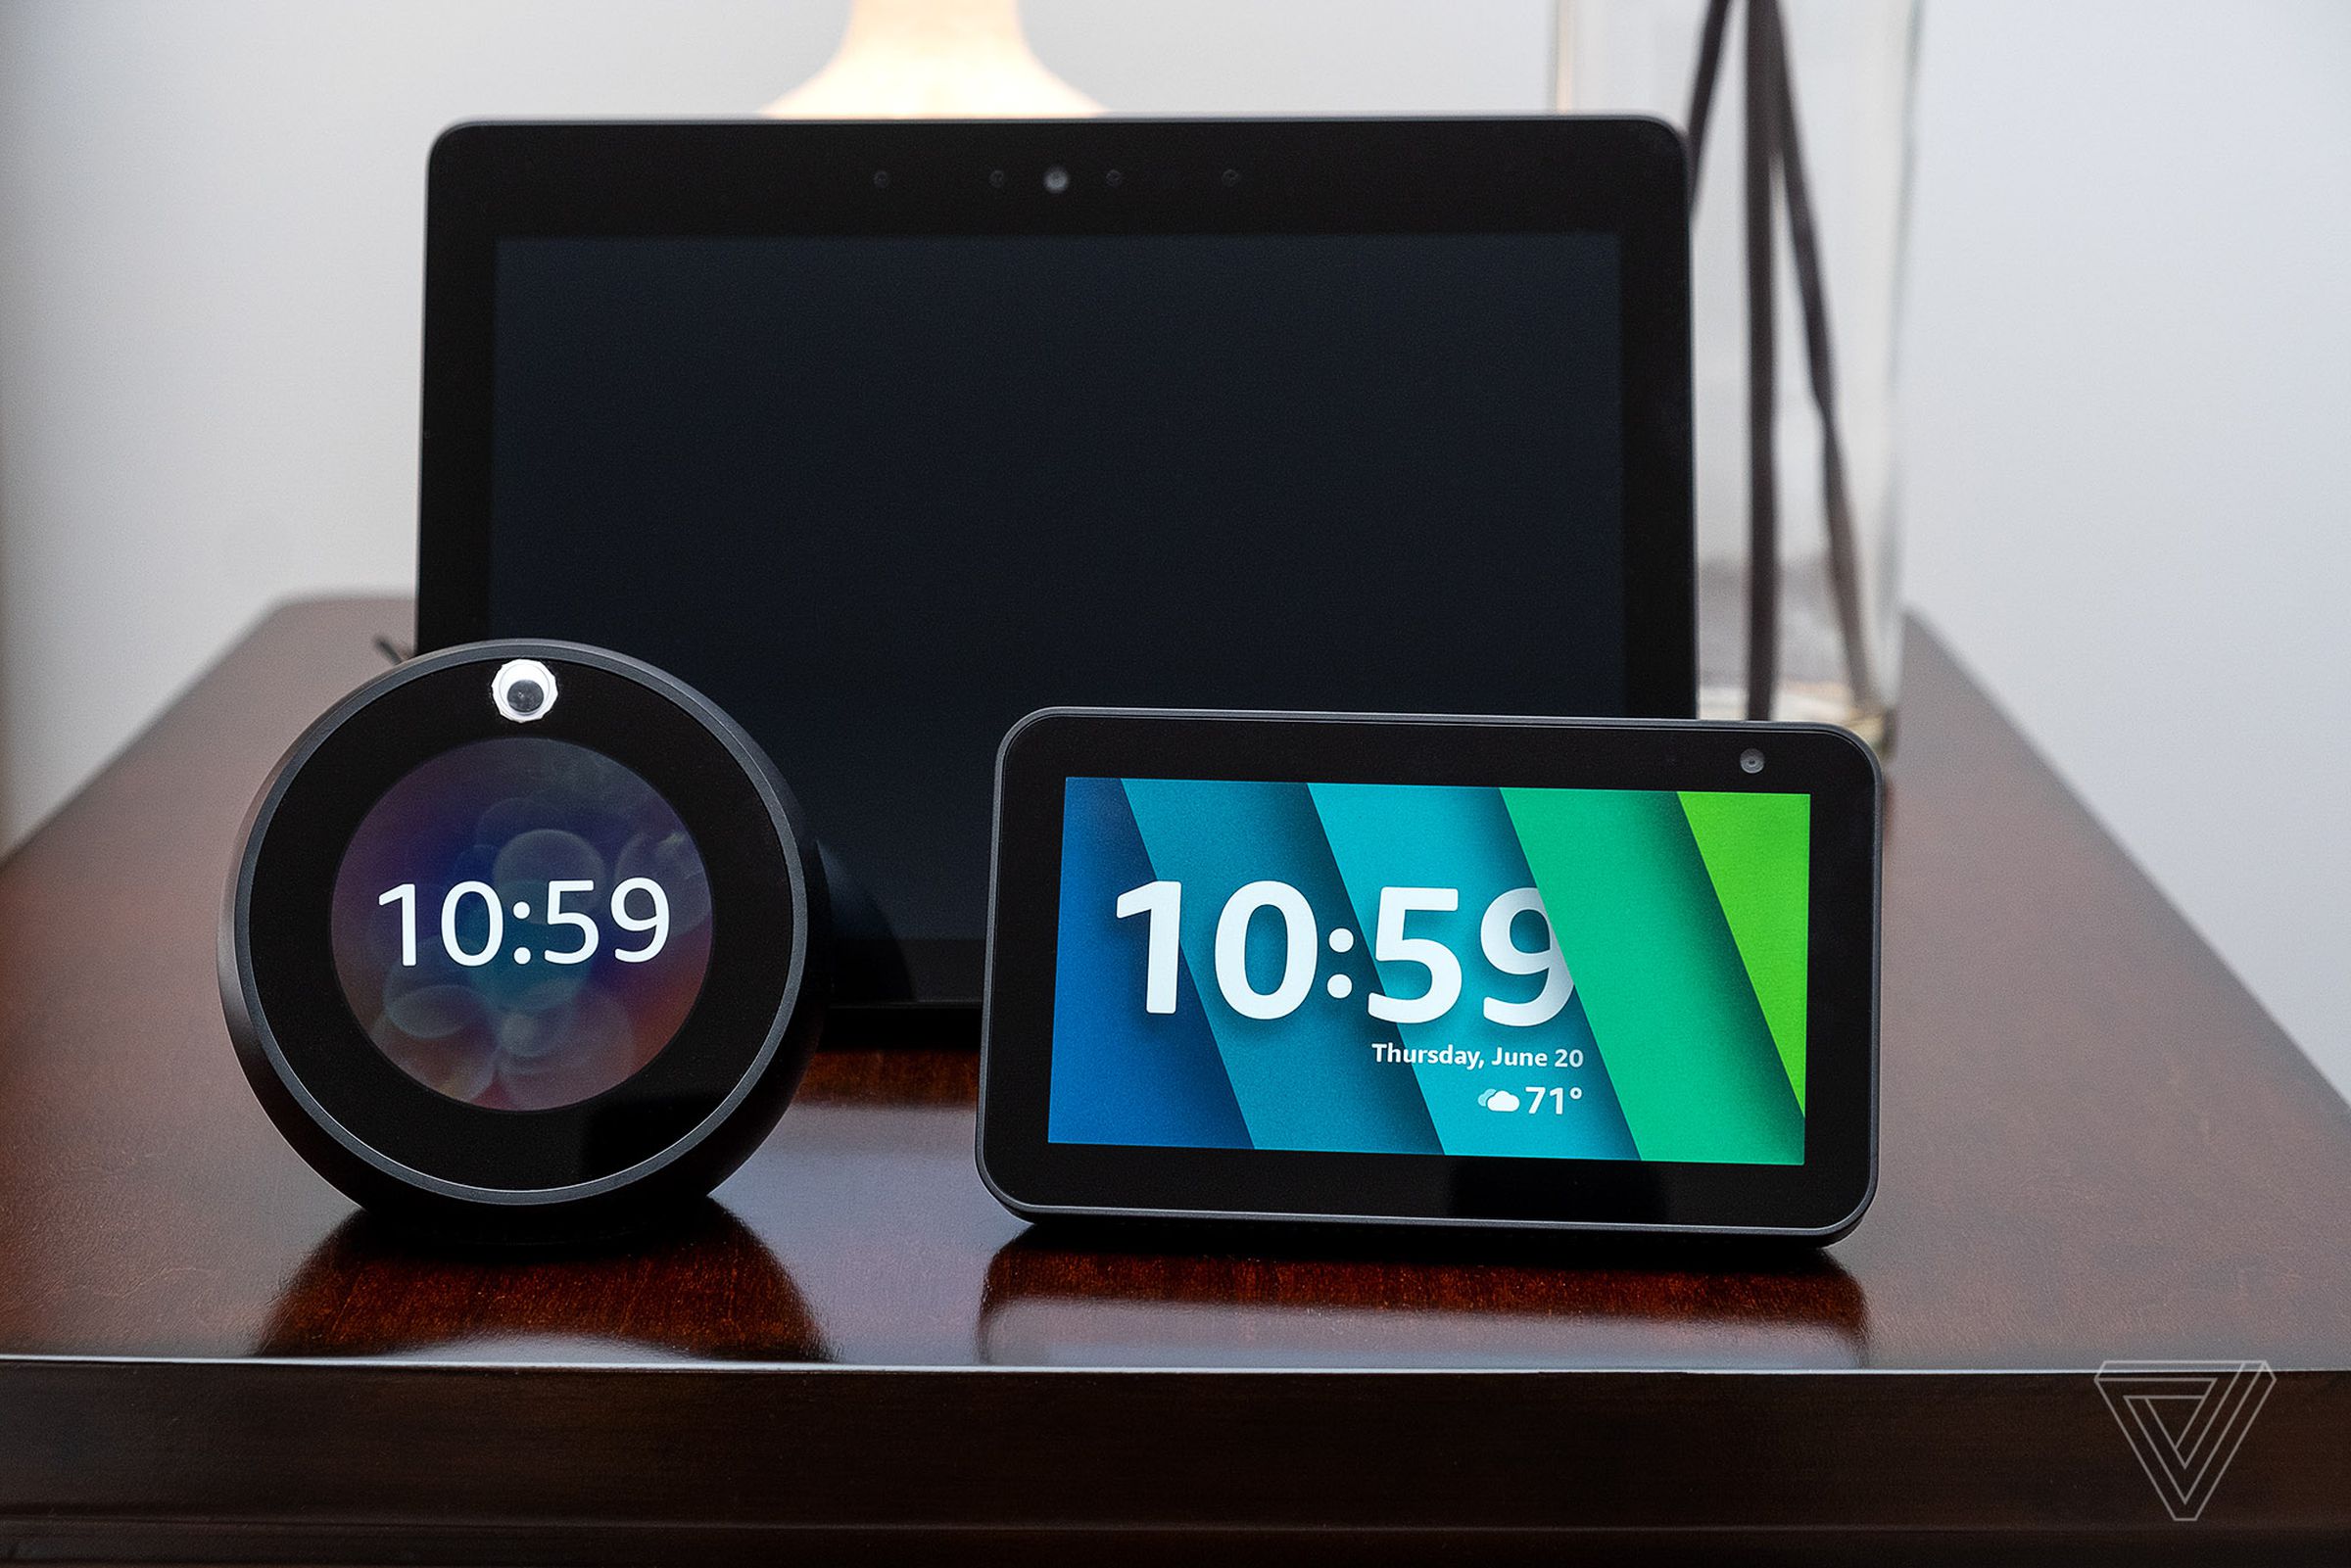 The Echo Show 5 (right) is only slightly larger than the Echo Spot (left) but considerably smaller than the Echo Show (in rear).